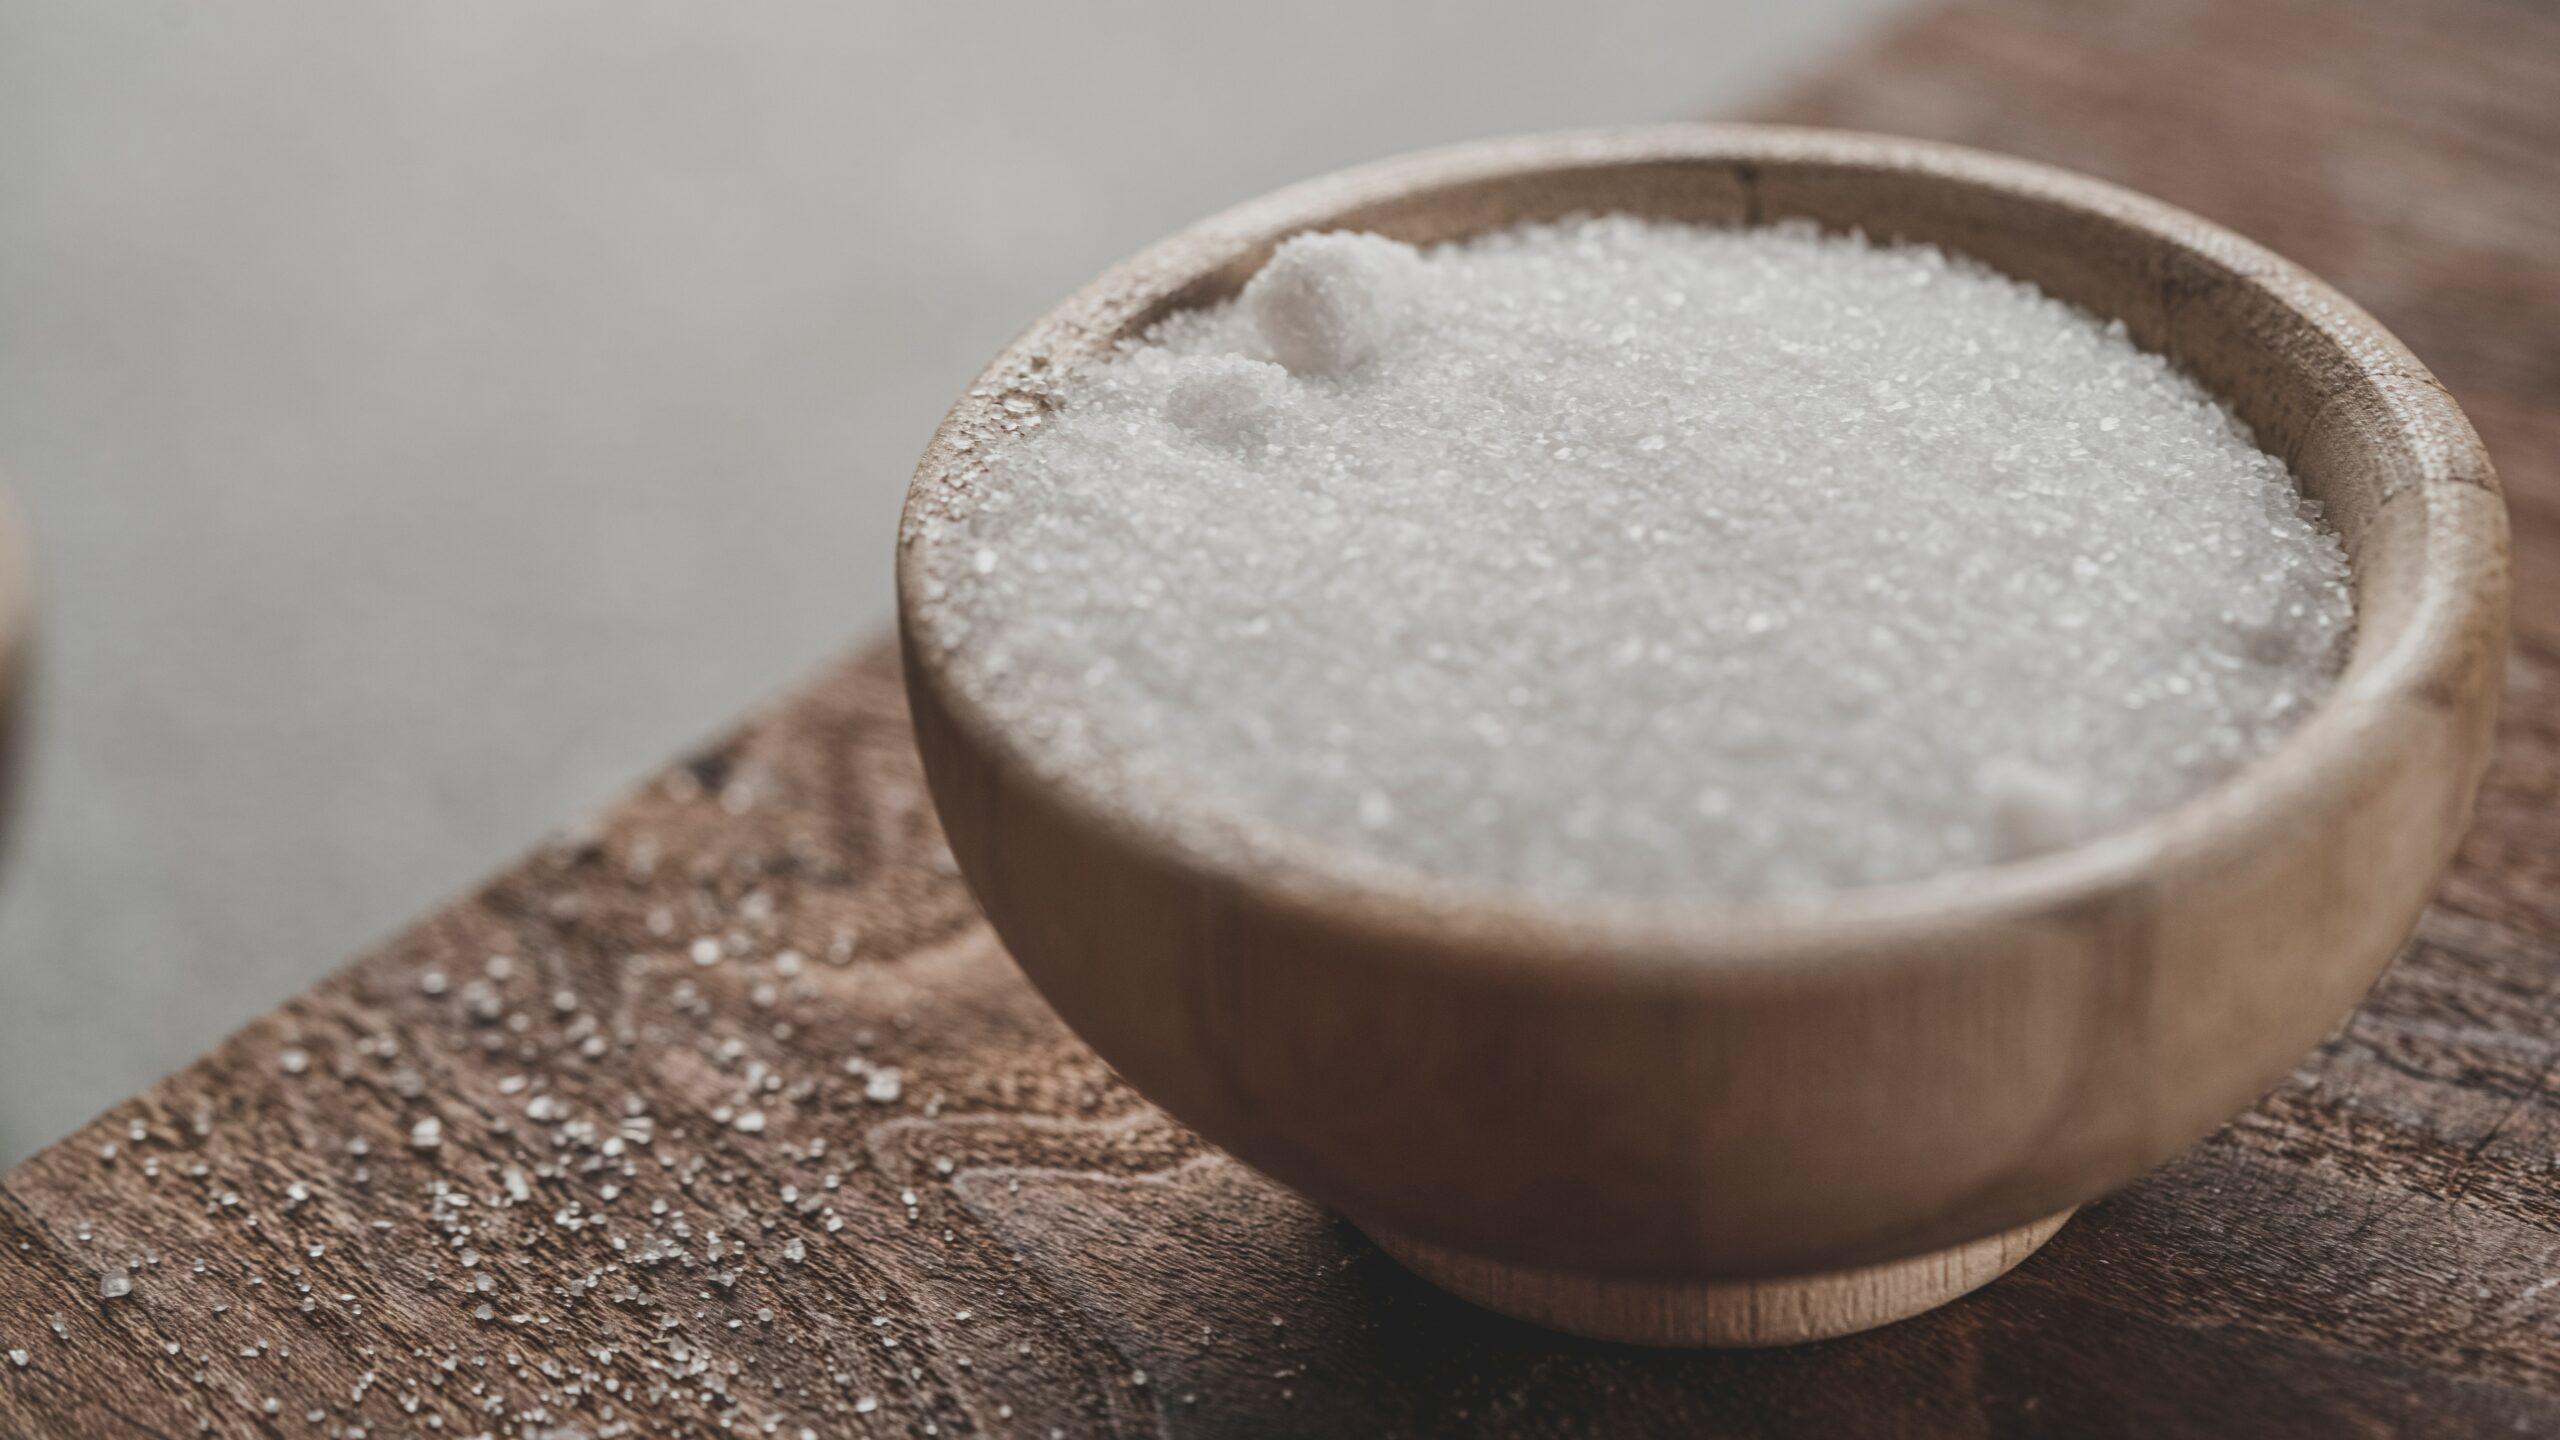 Exactly How To Cut Sugar Out Of Your Diet Dr. Will Cole